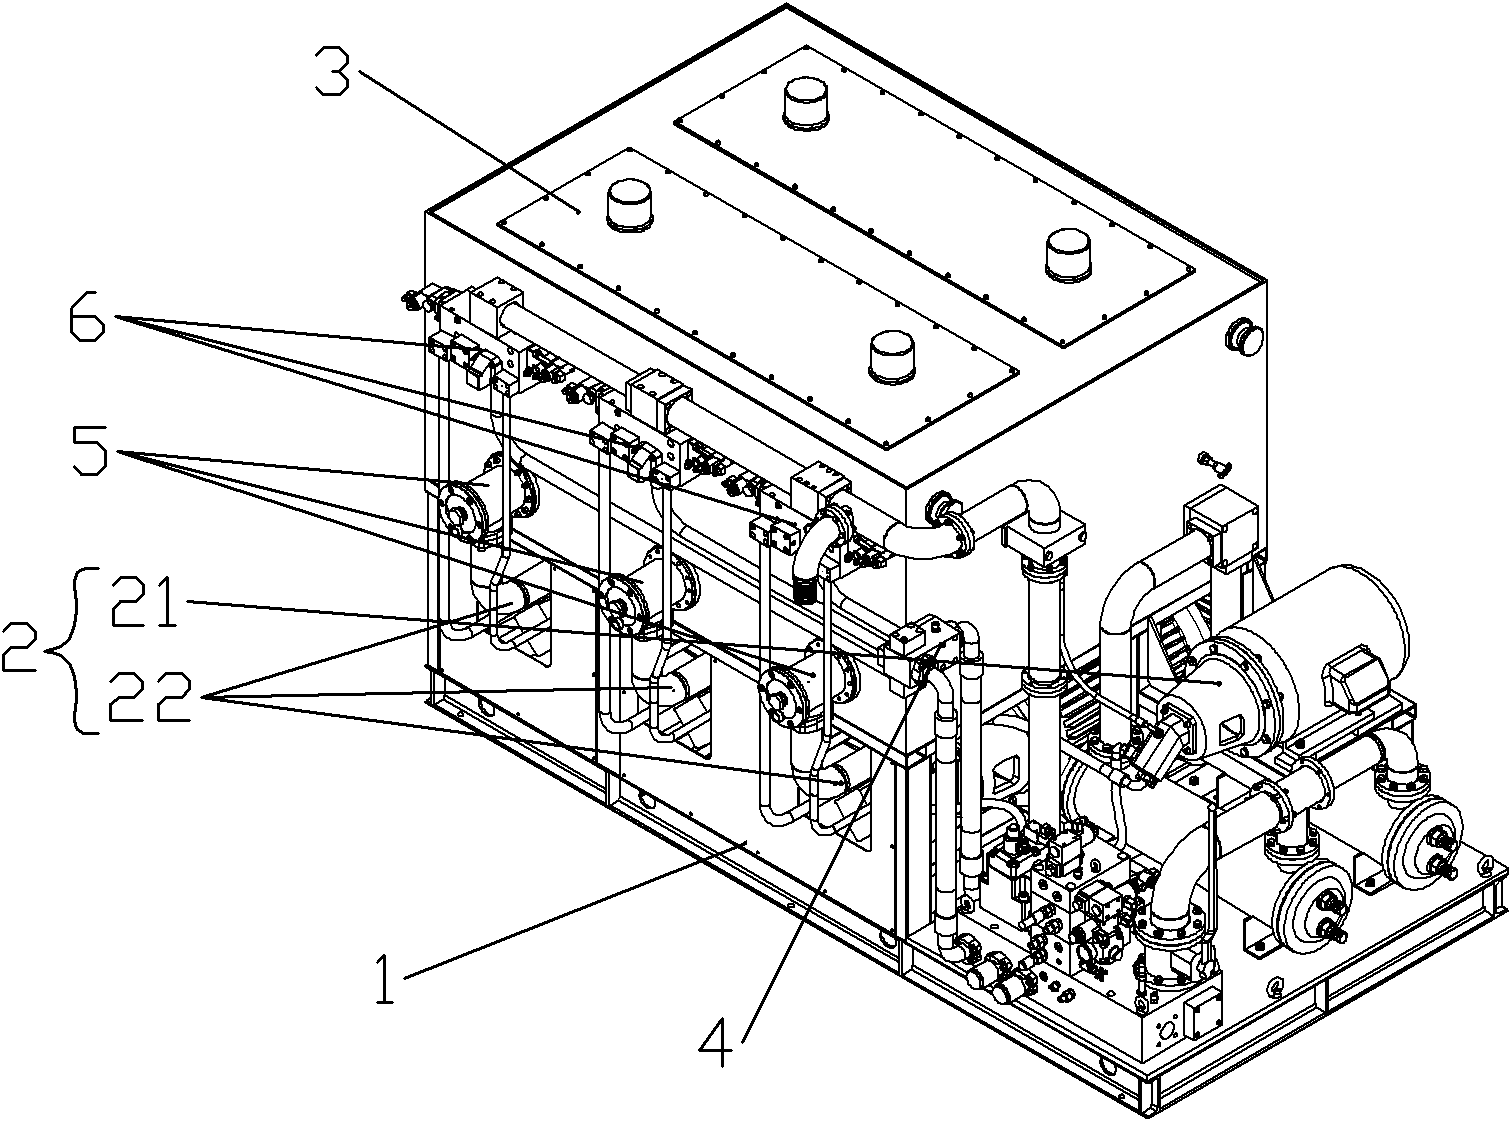 Large-scale upper oil tank hydraulic power unit